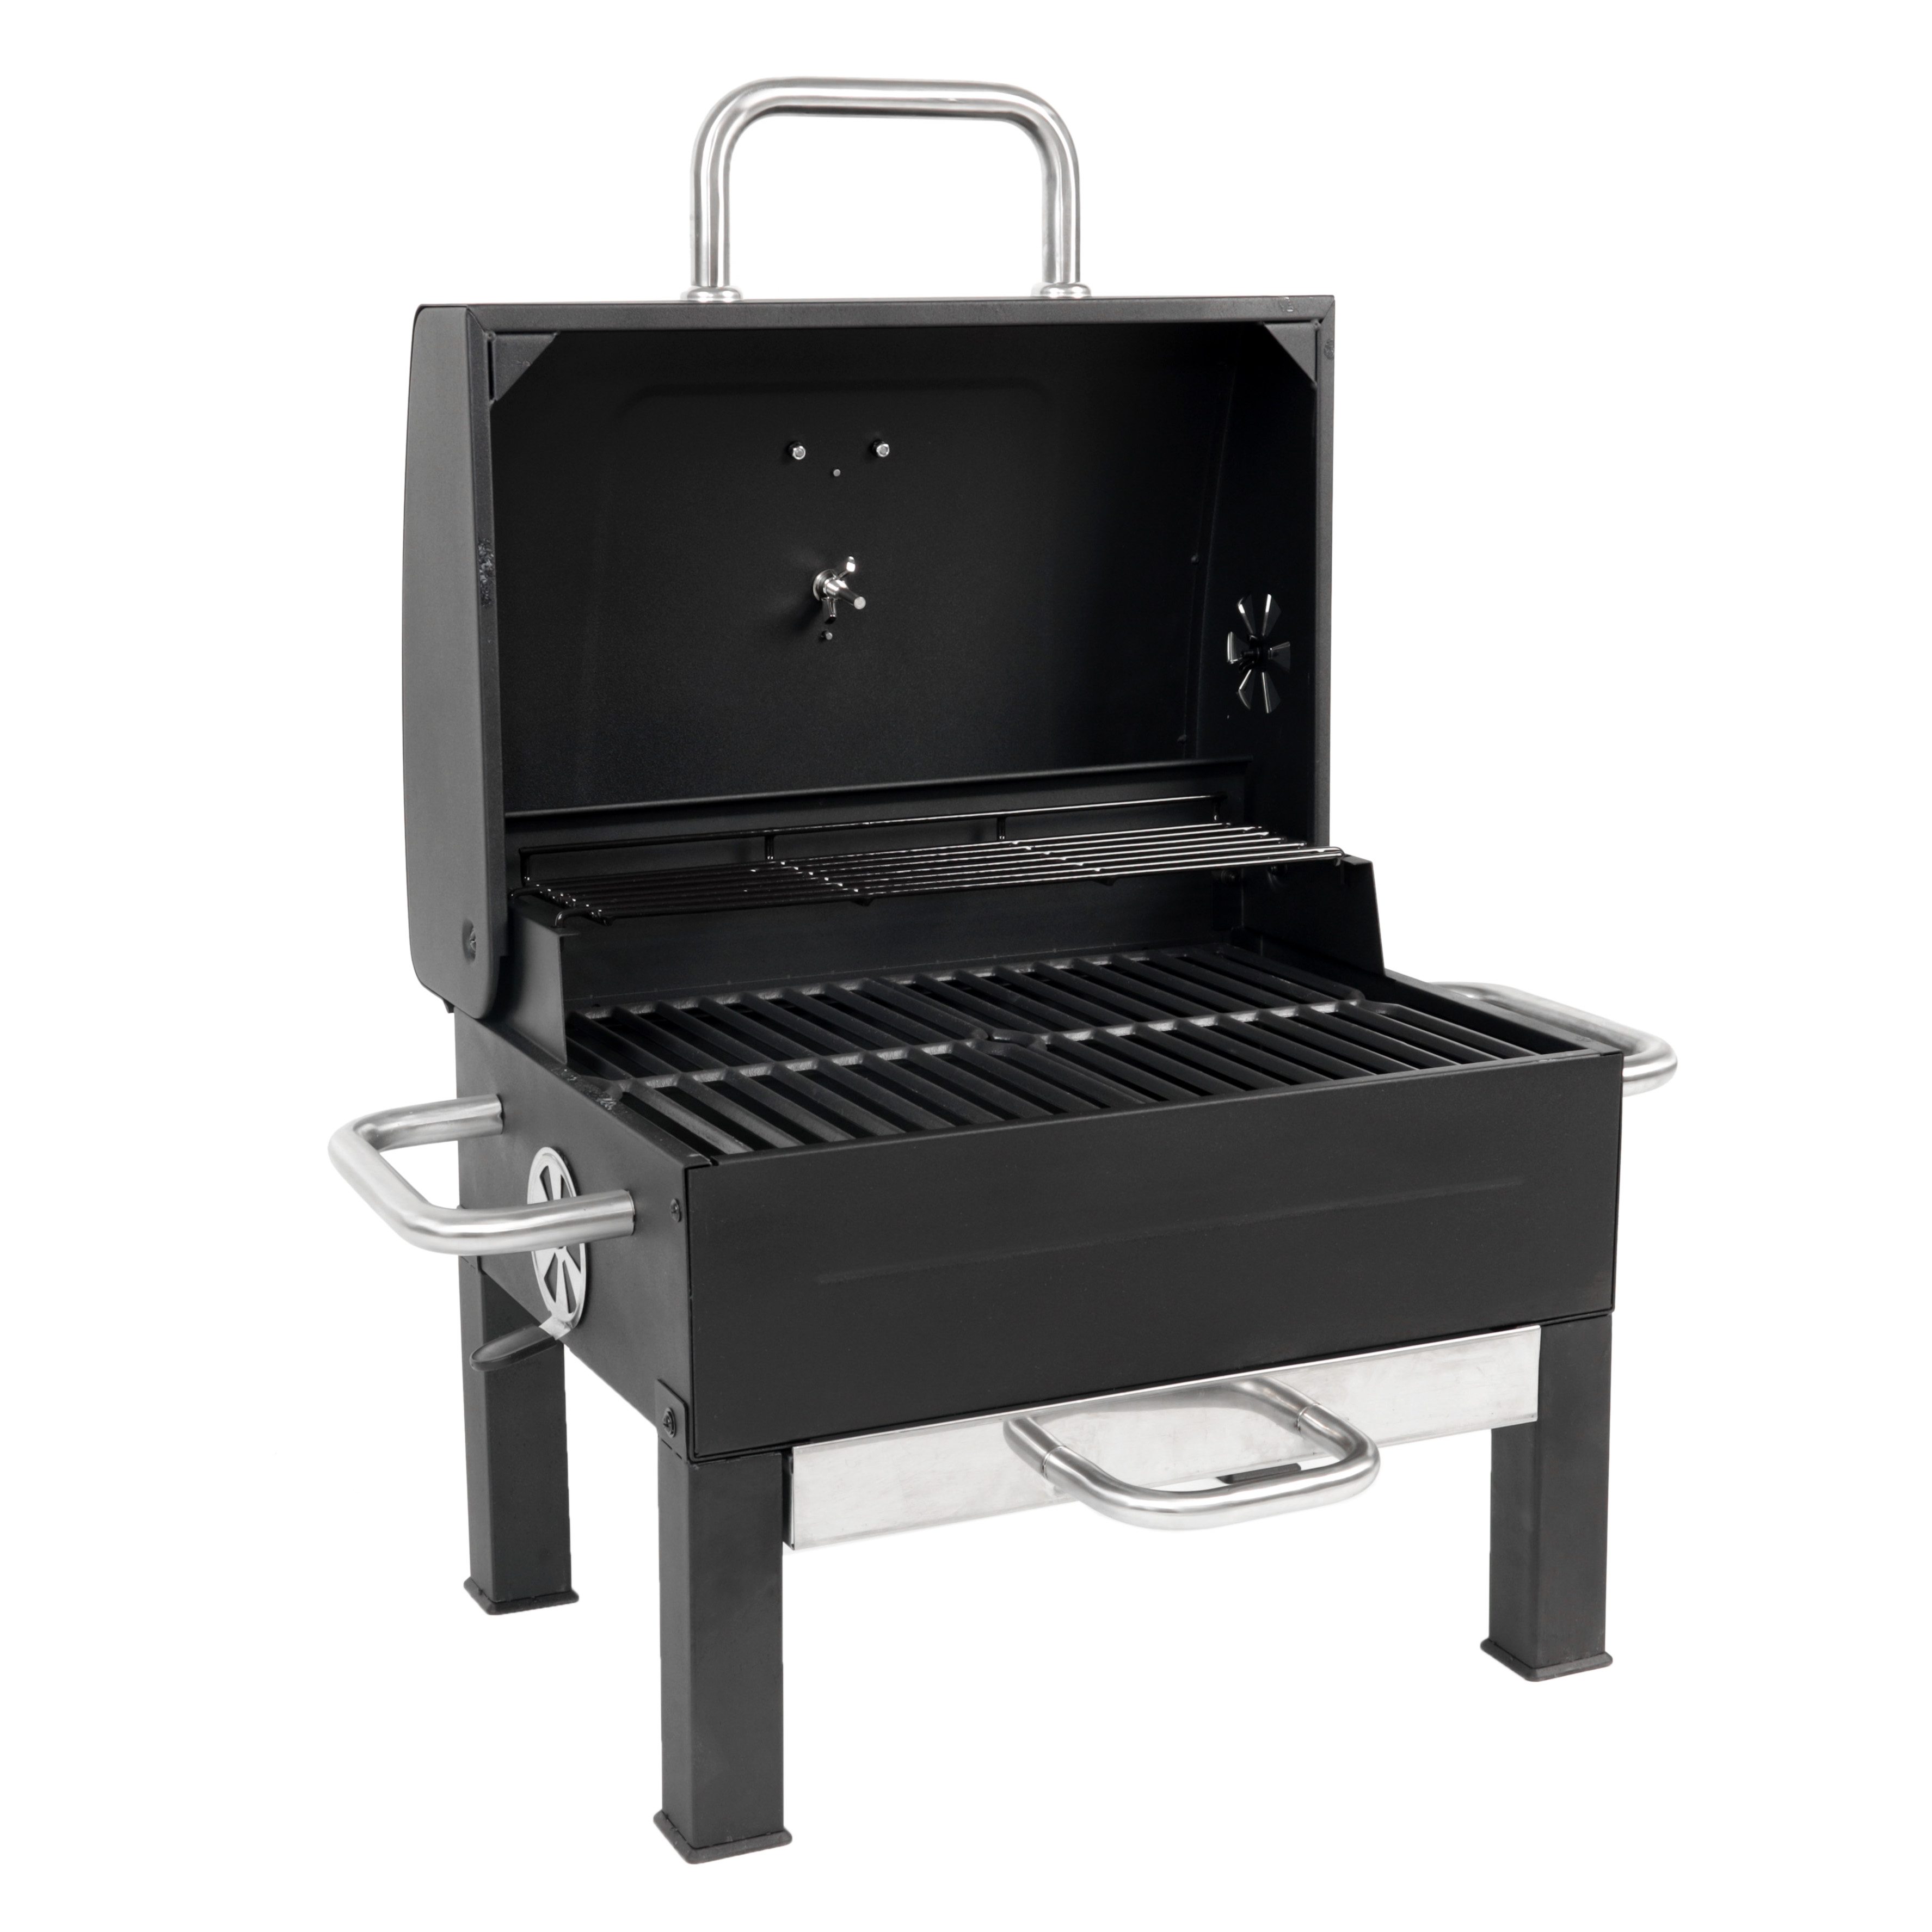 Expert Grill Premium Portable Charcoal Grill, Black and Stainless Steel - image 10 of 18